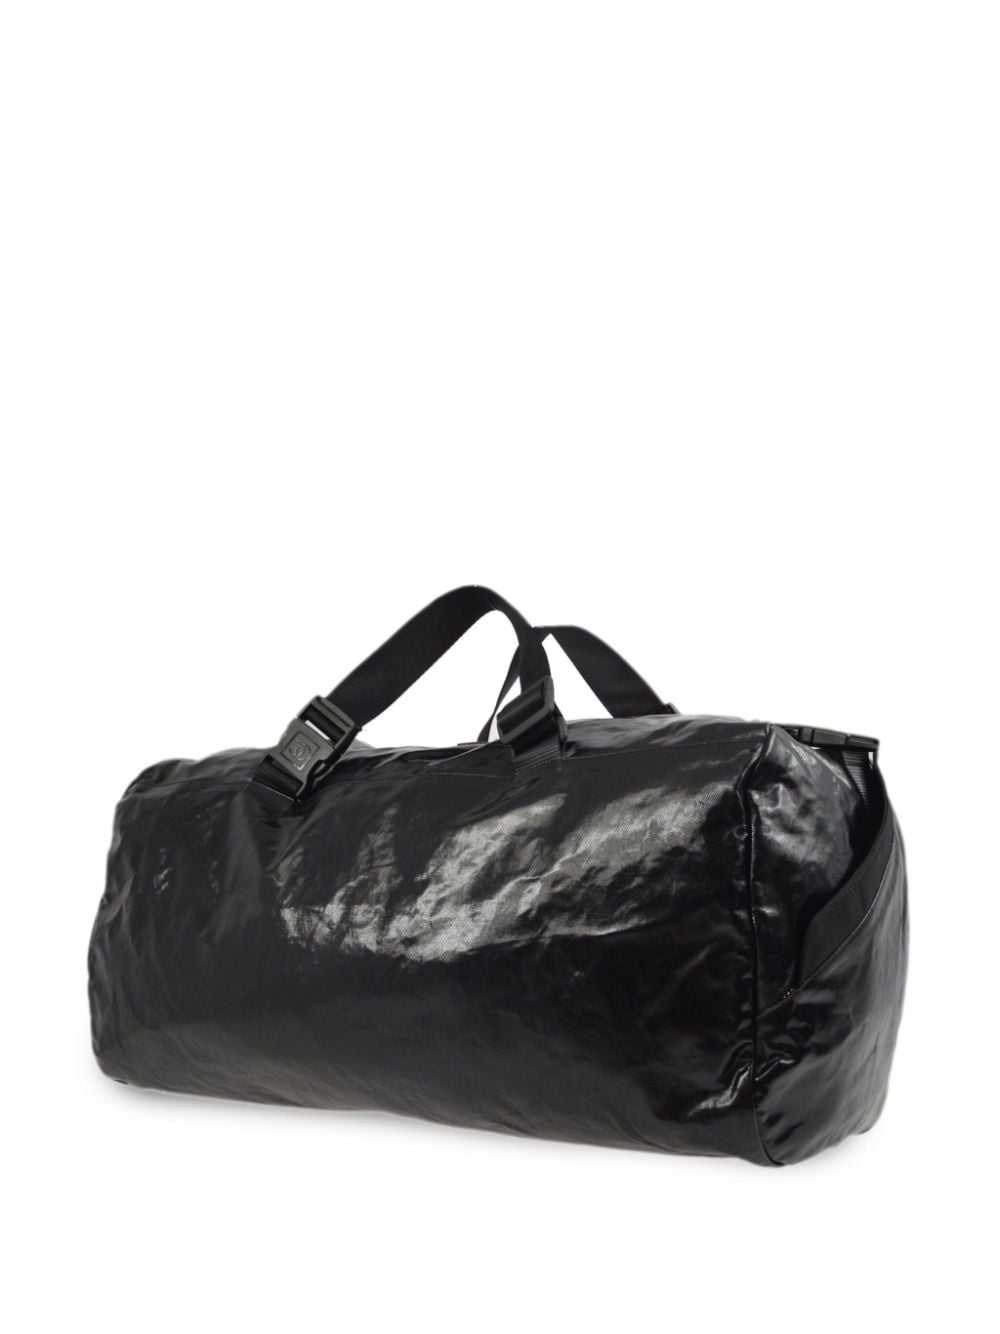 CHANEL Pre-Owned 2007 Sport Line duffle bag - Bla… - image 2